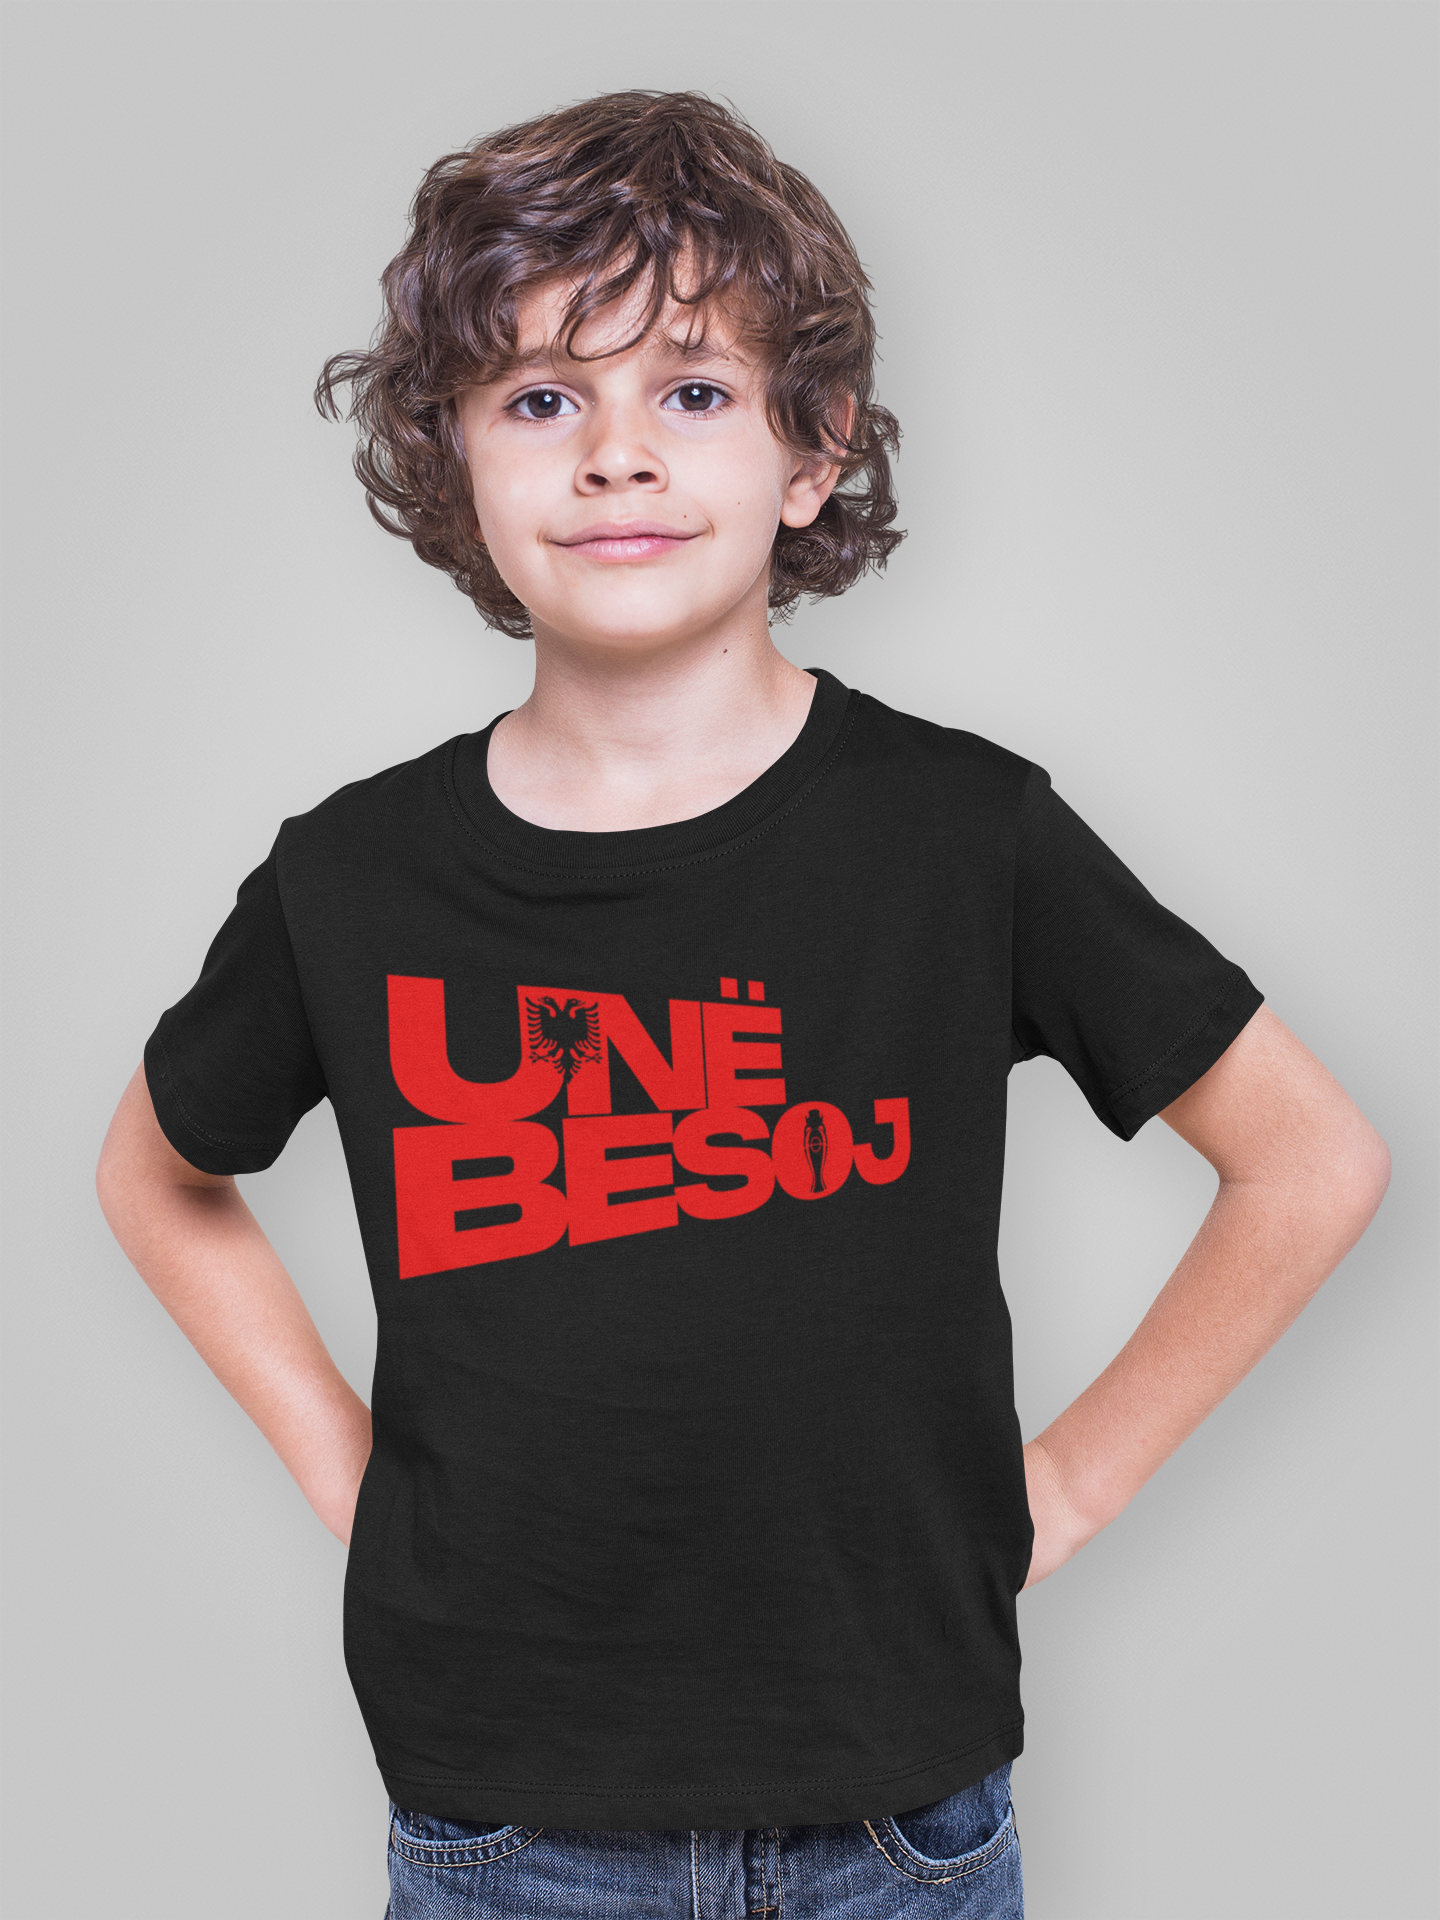 BLACK T-SHIRT FOR KIDS WITH TYPOGRAPHY